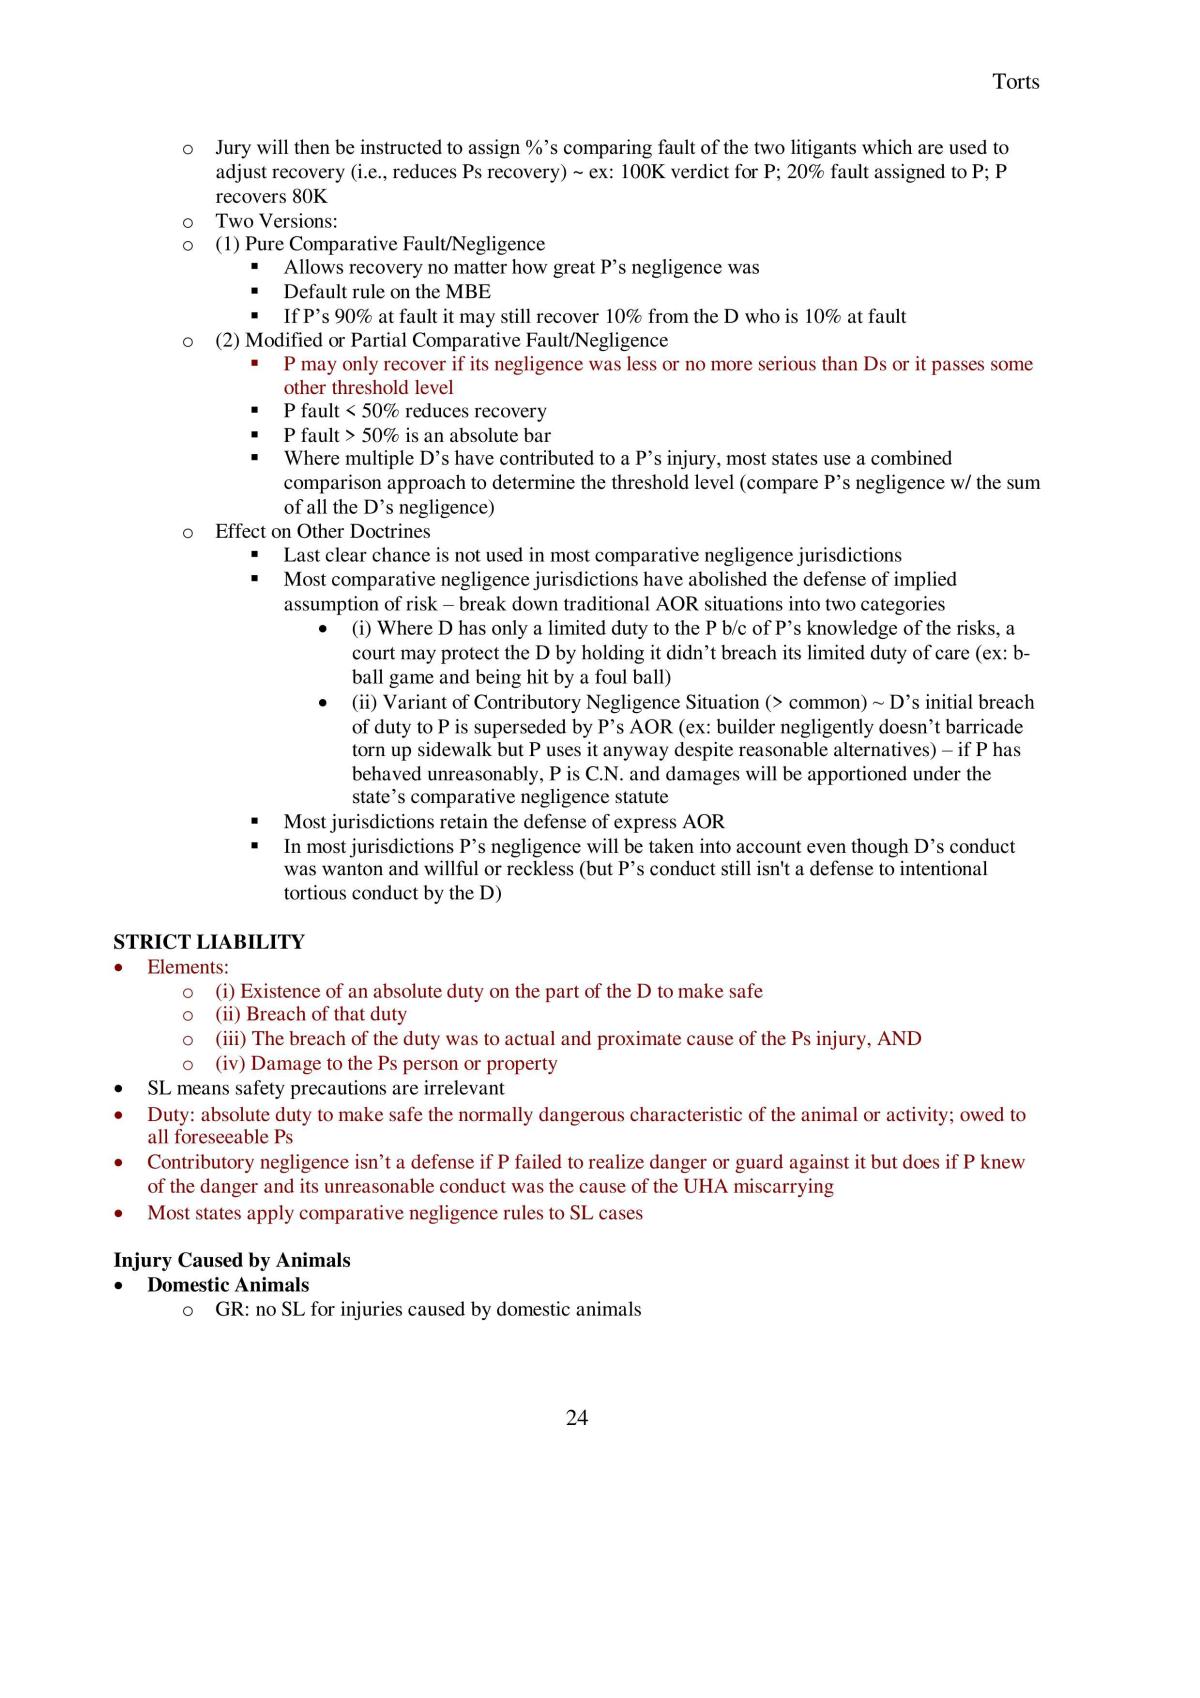 Torts Notes - Page 24